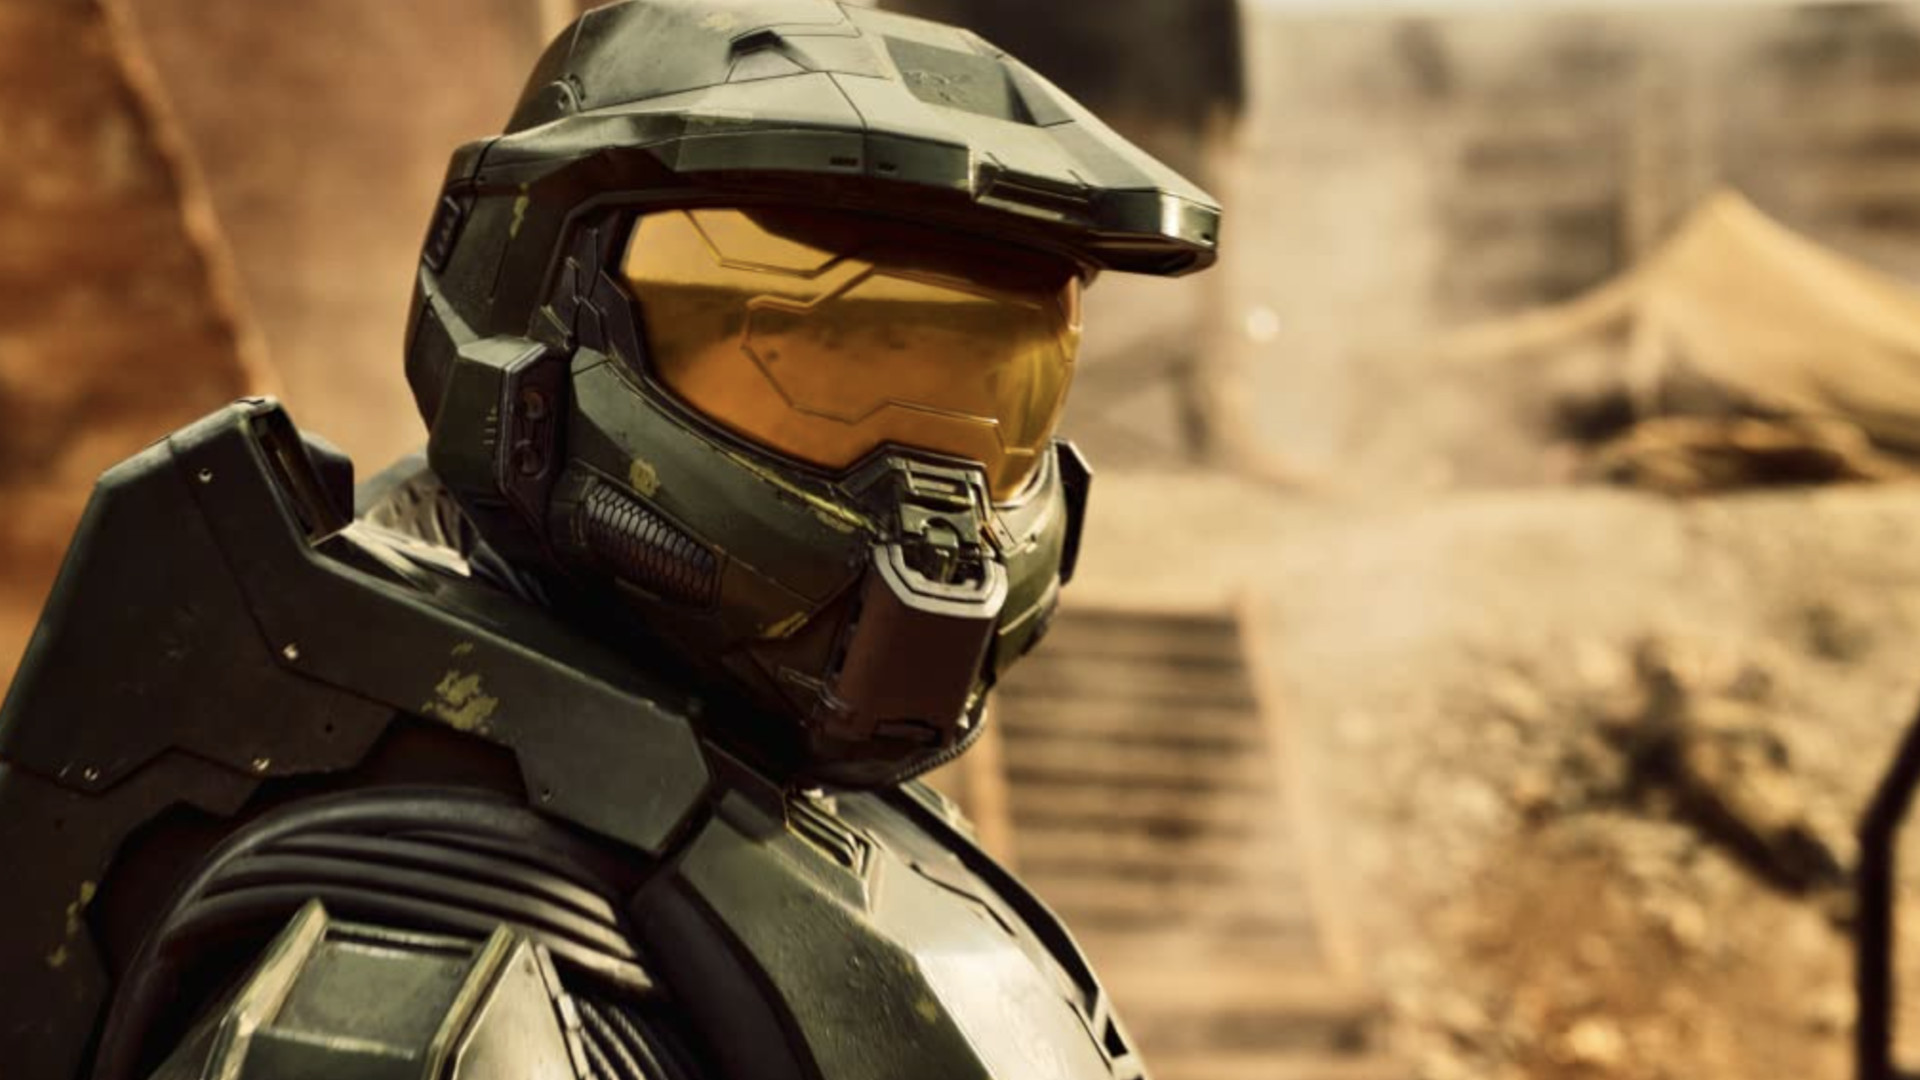 Halo TV series now on Paramount+: How to watch online, live stream